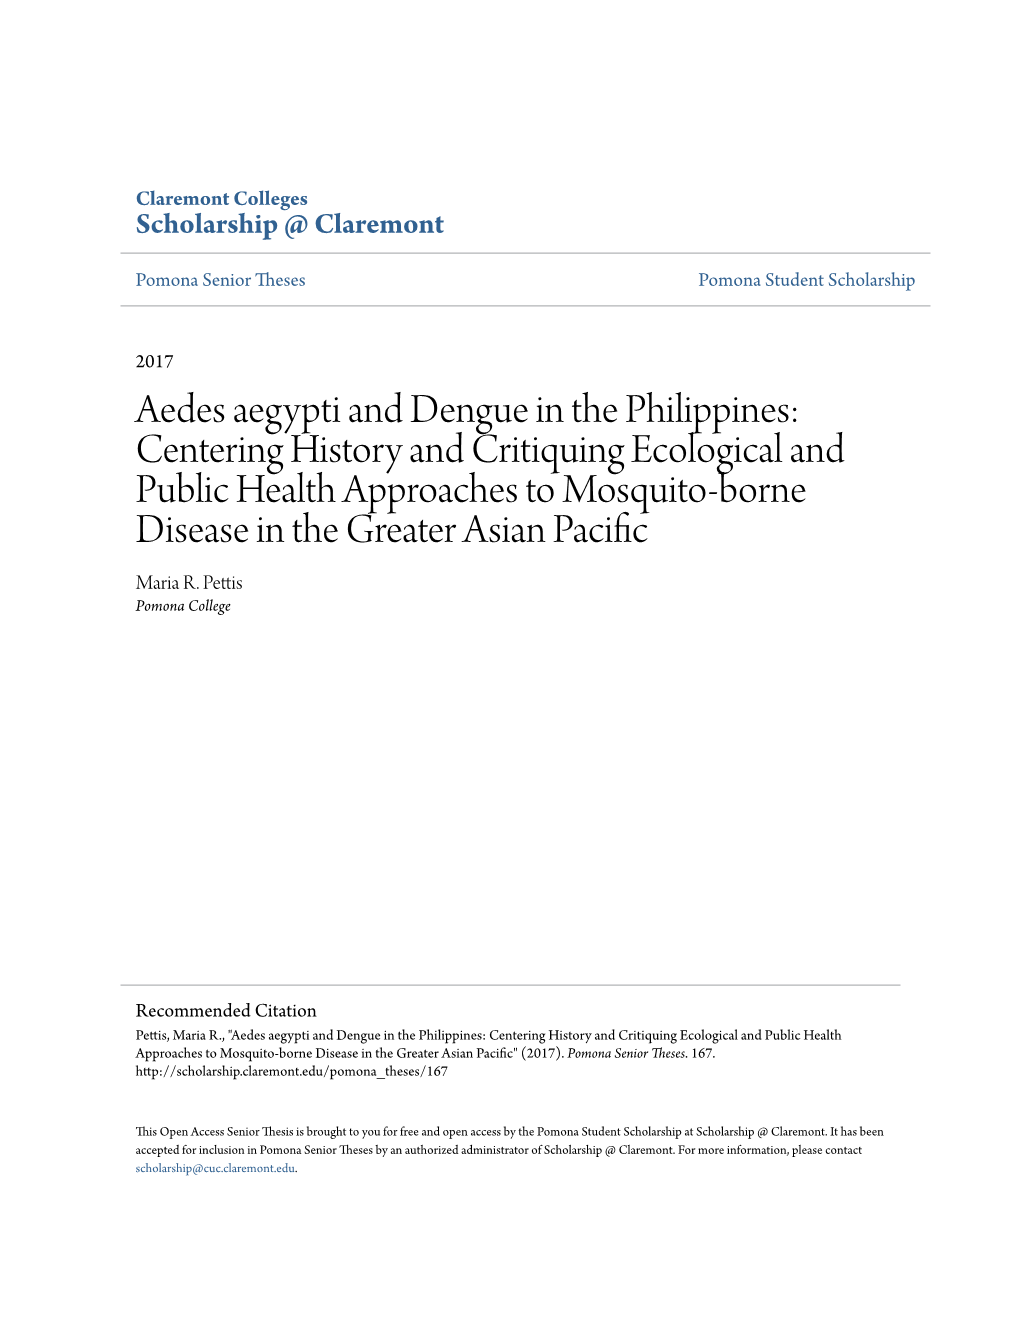 Aedes Aegypti and Dengue in the Philippines: Centering History and Critiquing Ecological and Public Health Approaches to Mosquit